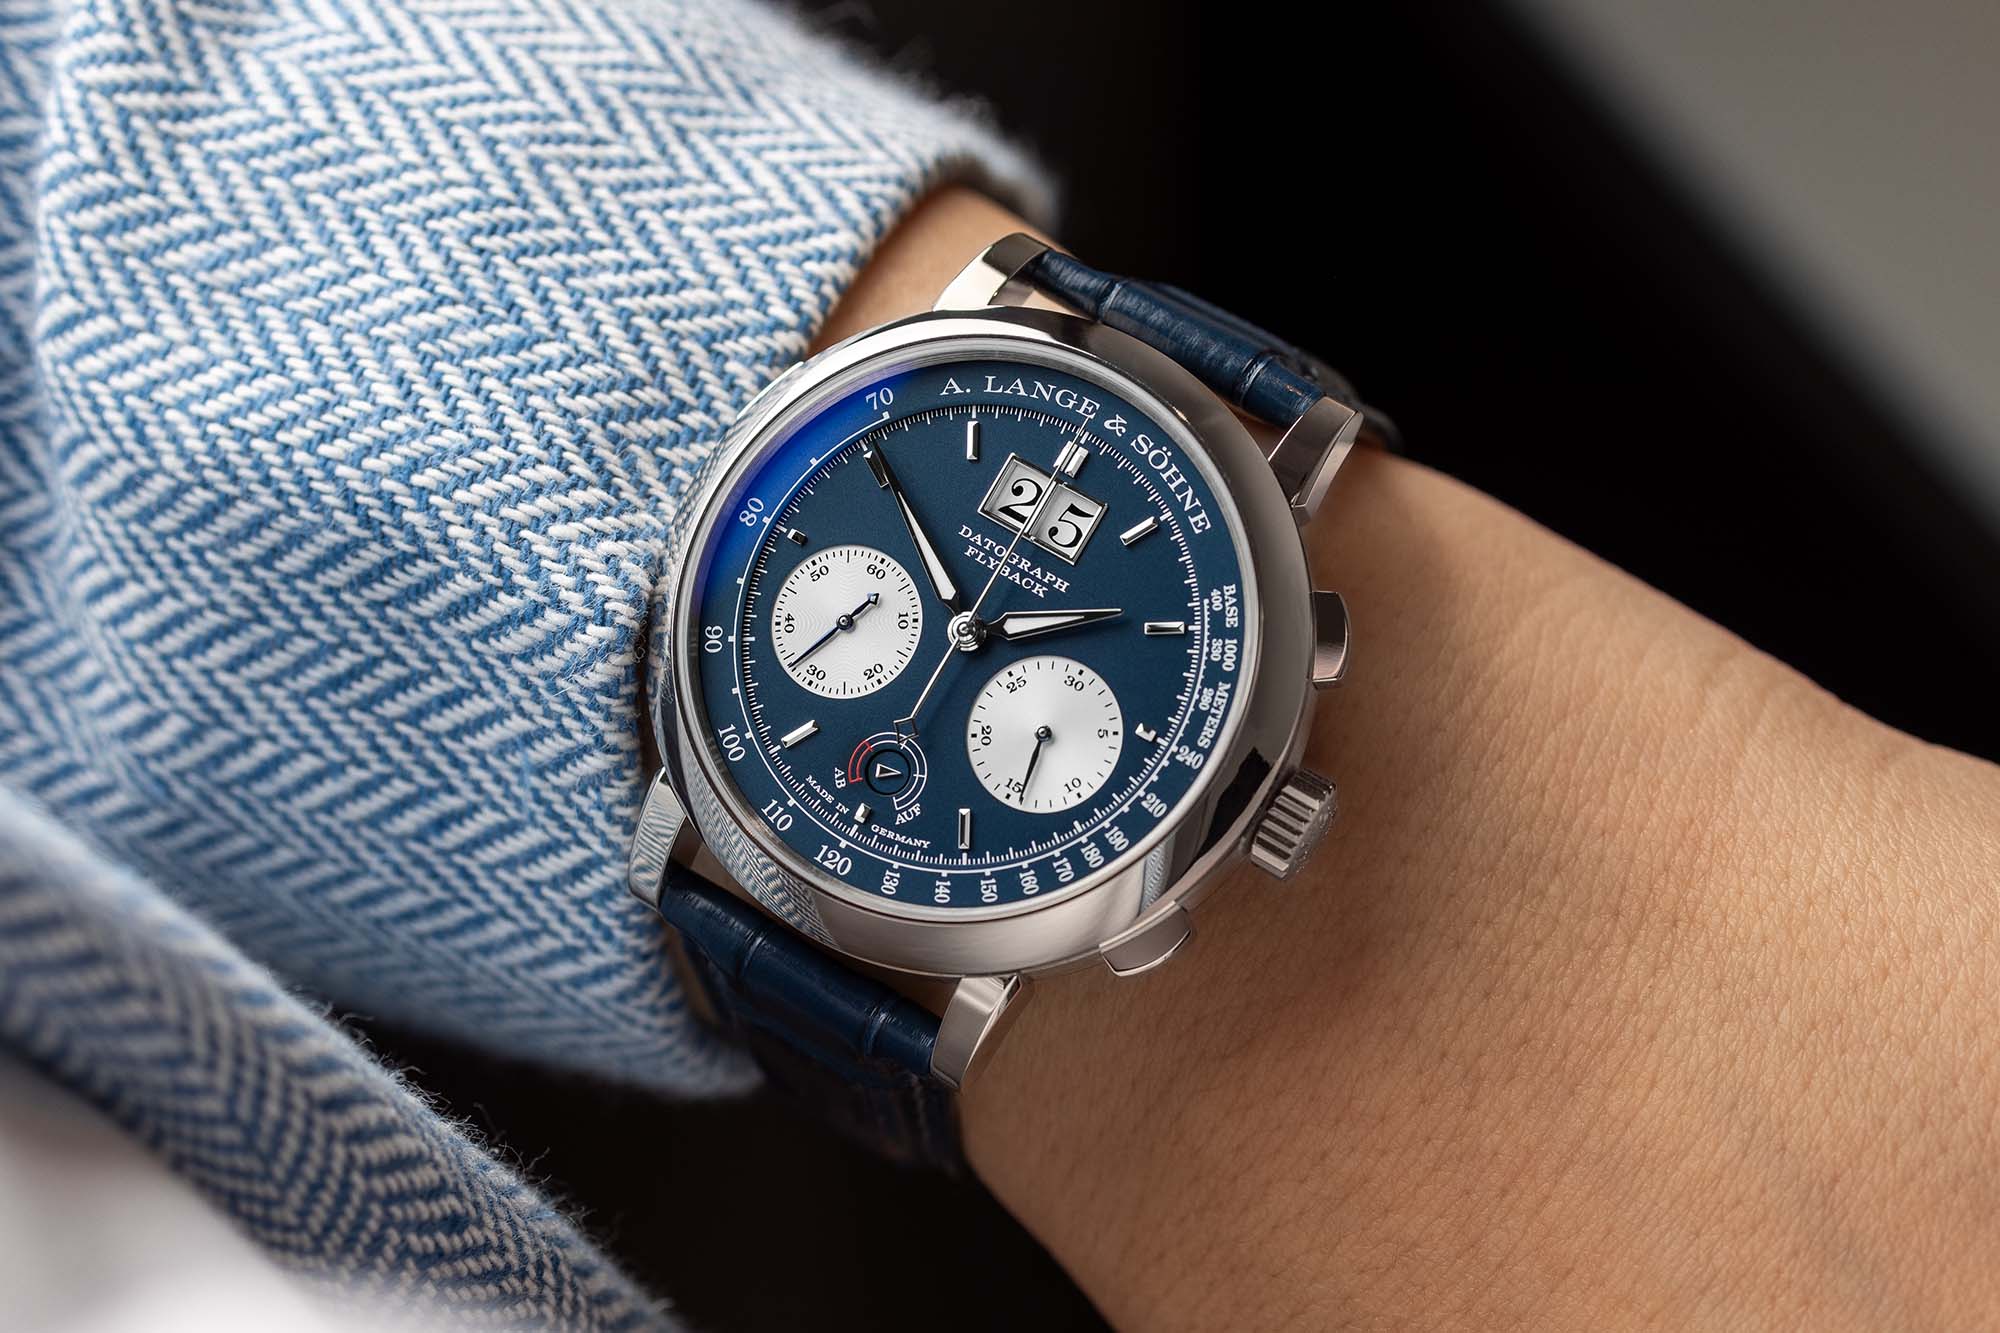 <div>A. Lange & Söhne Celebrates 25 Years of the Datograph</div>